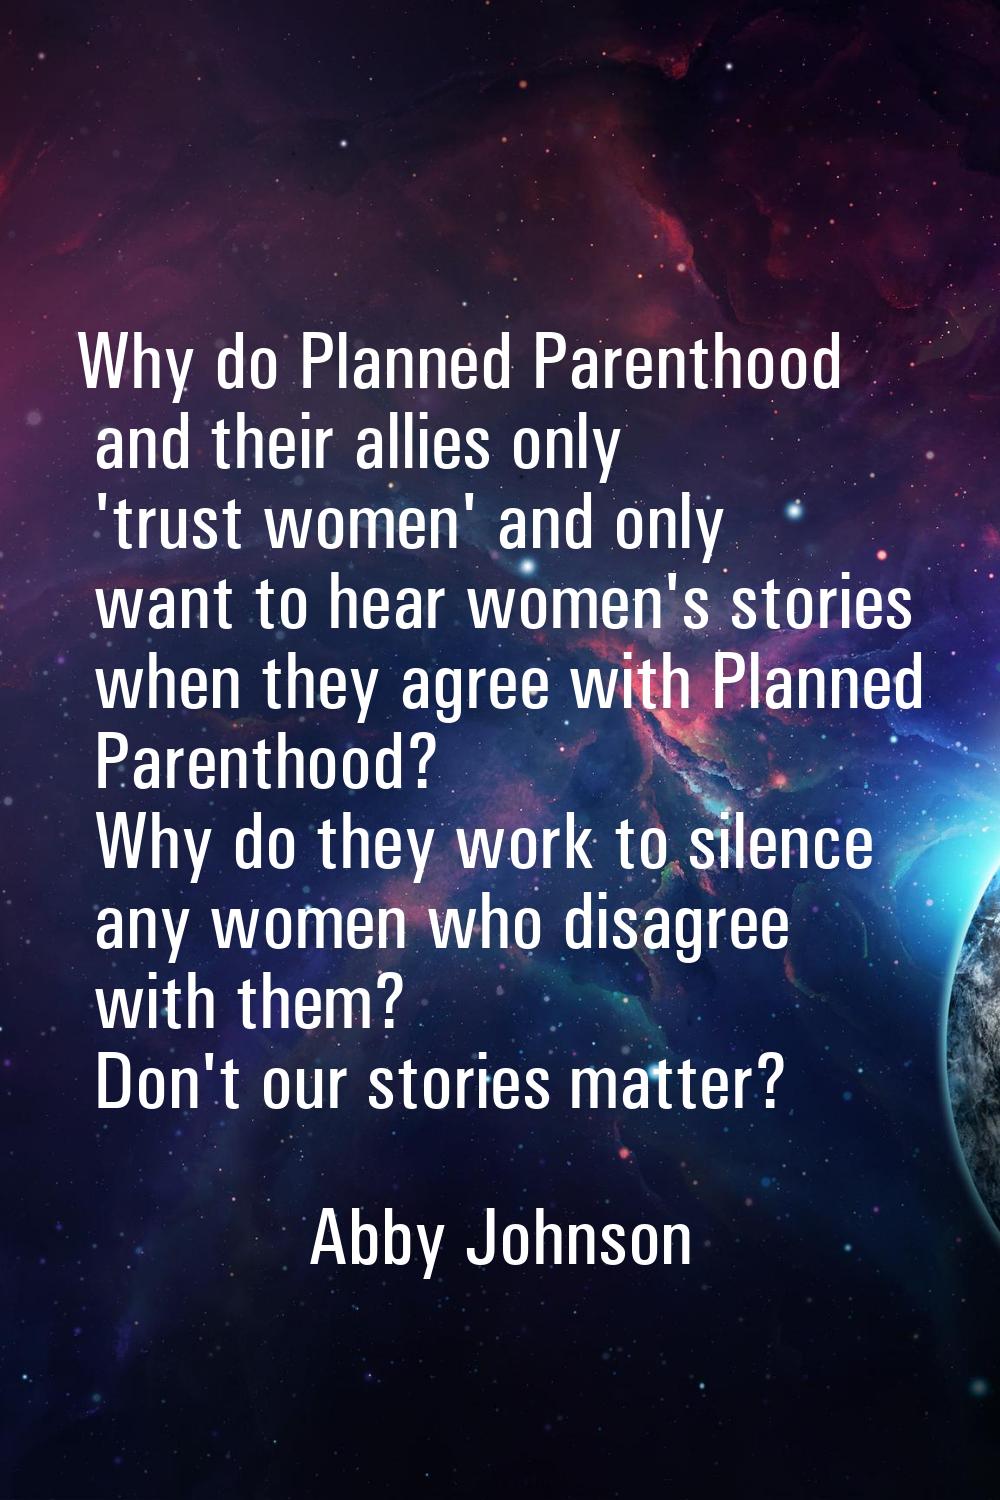 Why do Planned Parenthood and their allies only 'trust women' and only want to hear women's stories